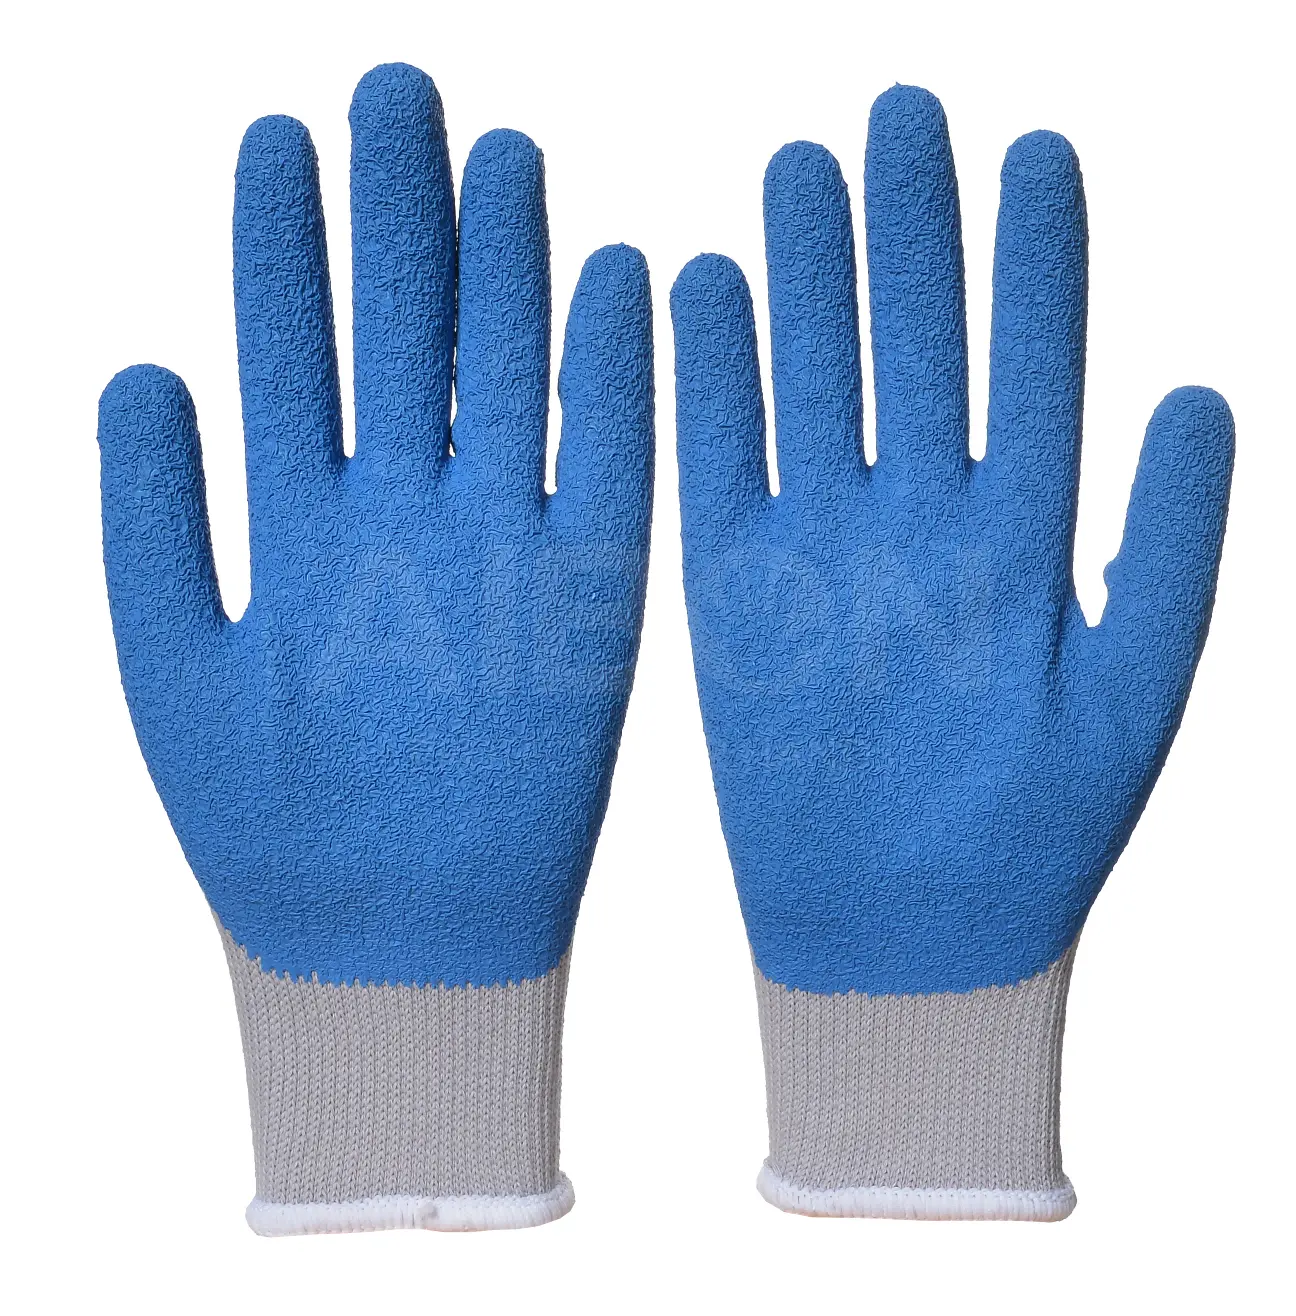 breathable colourful superior grip gardening knitted oil-proof making machines cowhide latex lumberjack goatskin work gloves